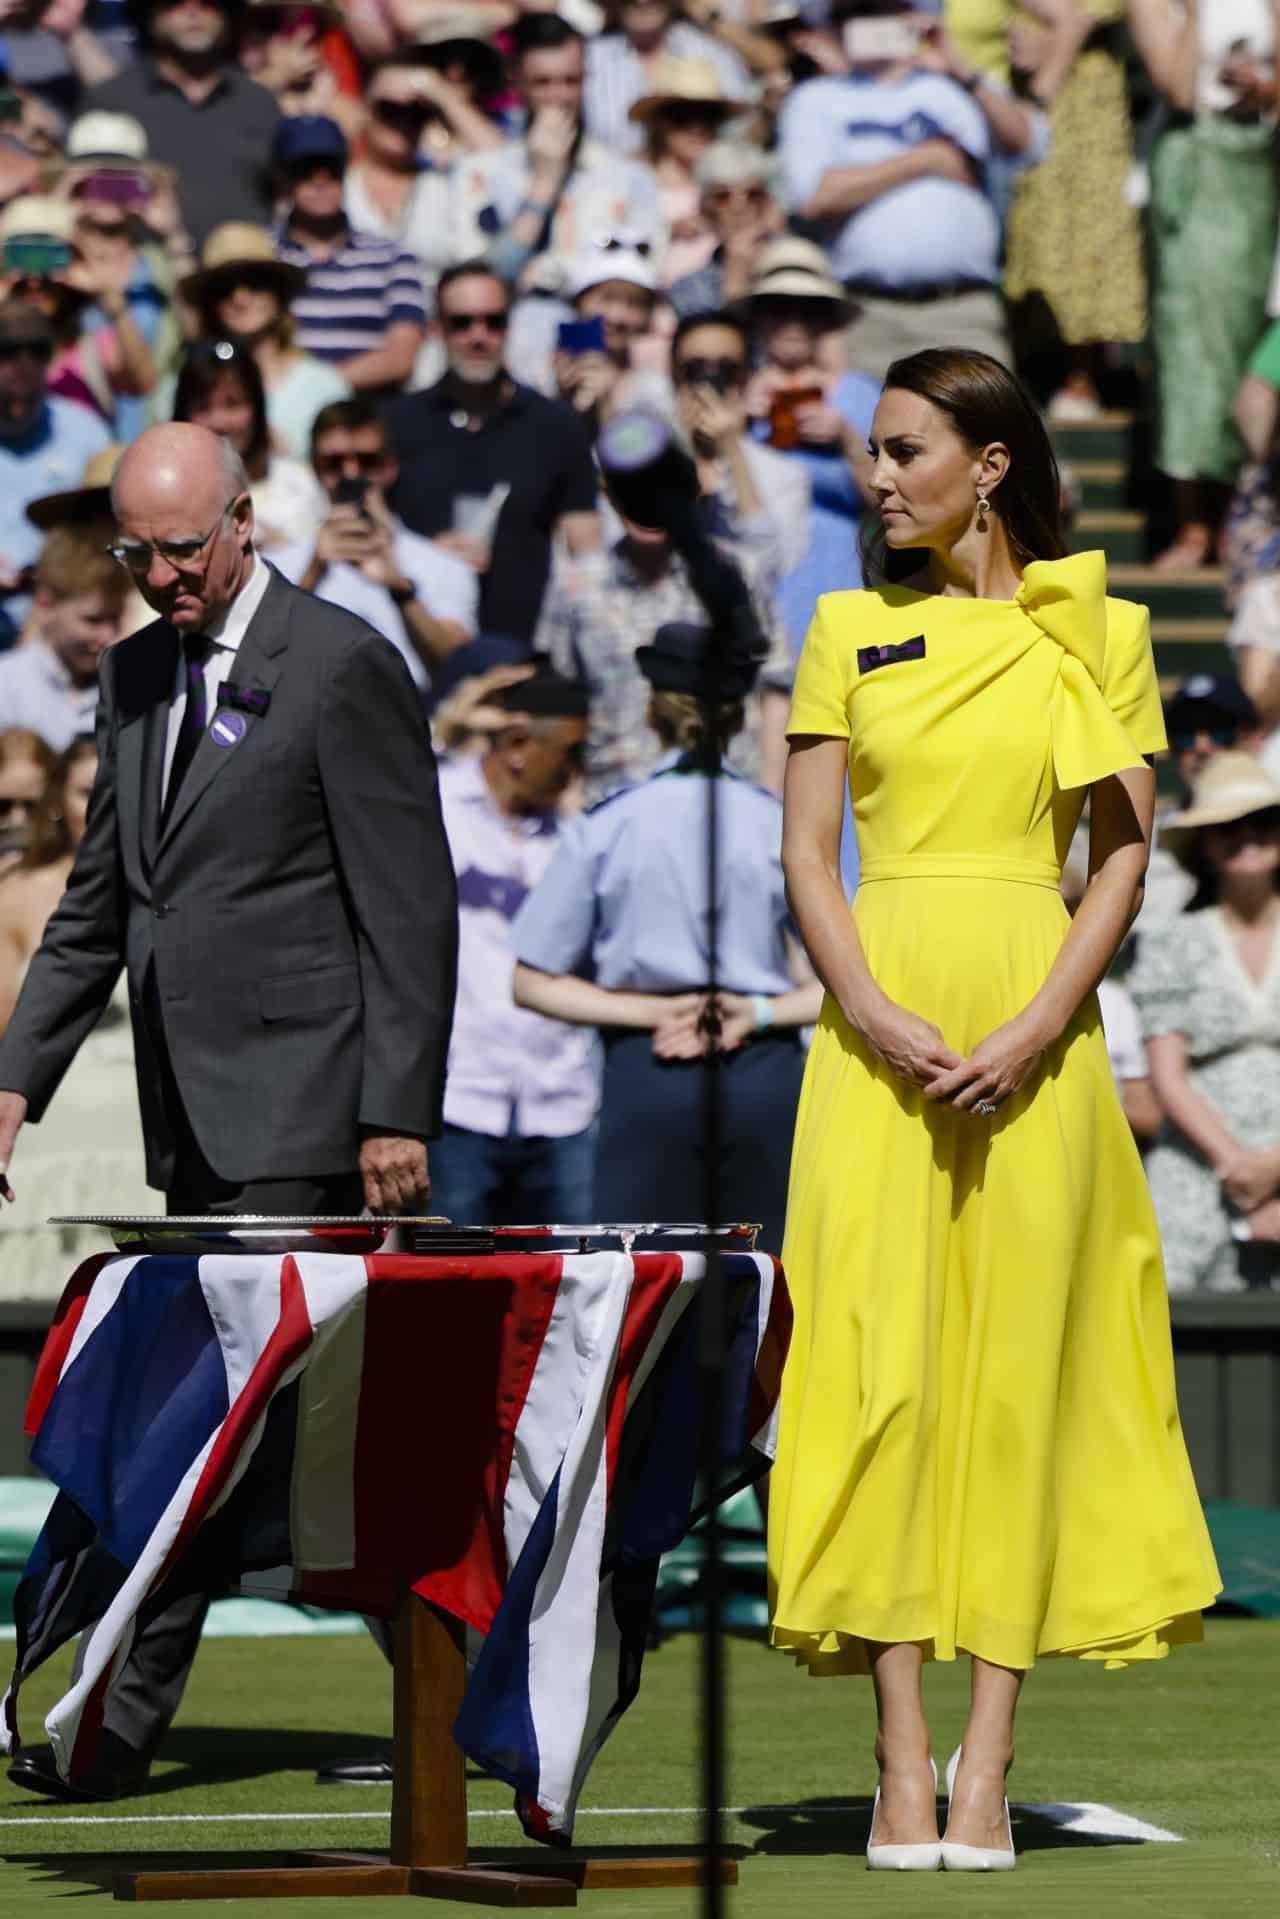 Kate Middleton Looks Amazing in Yellow Dress at the Wimbledon Women's Final